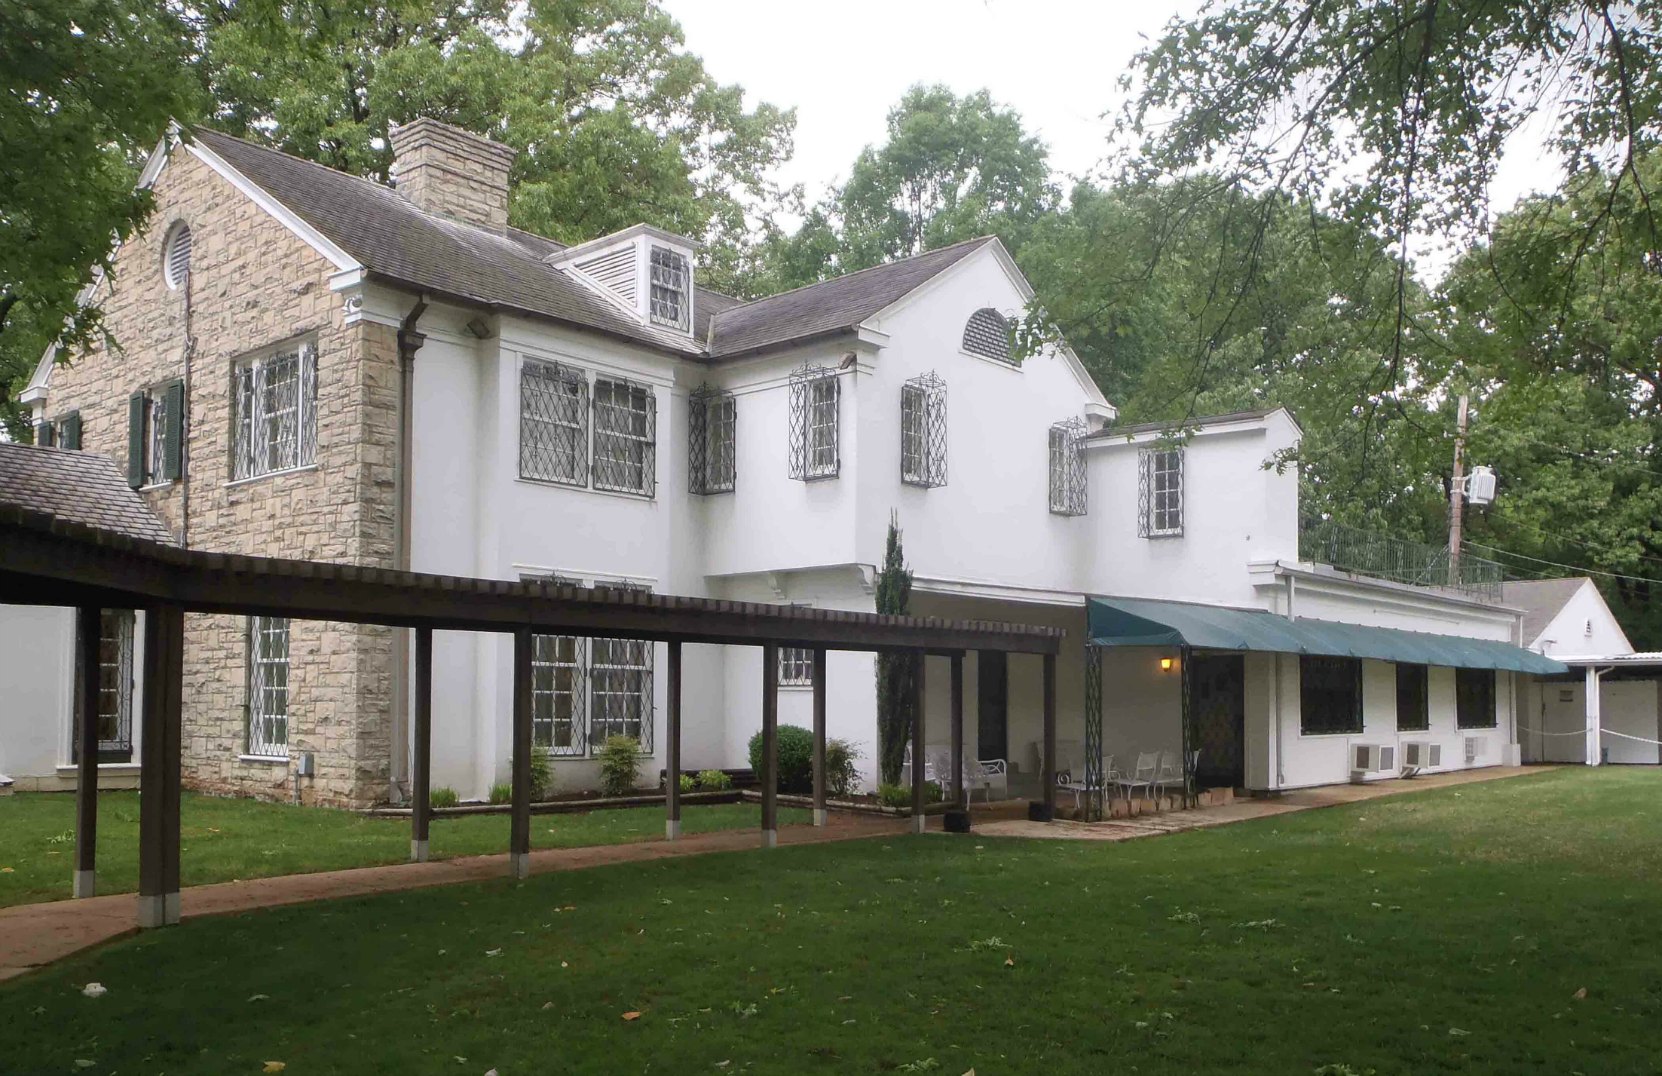 The rear of Elvis Presley's home at Graceland, Memphis, Tennessee